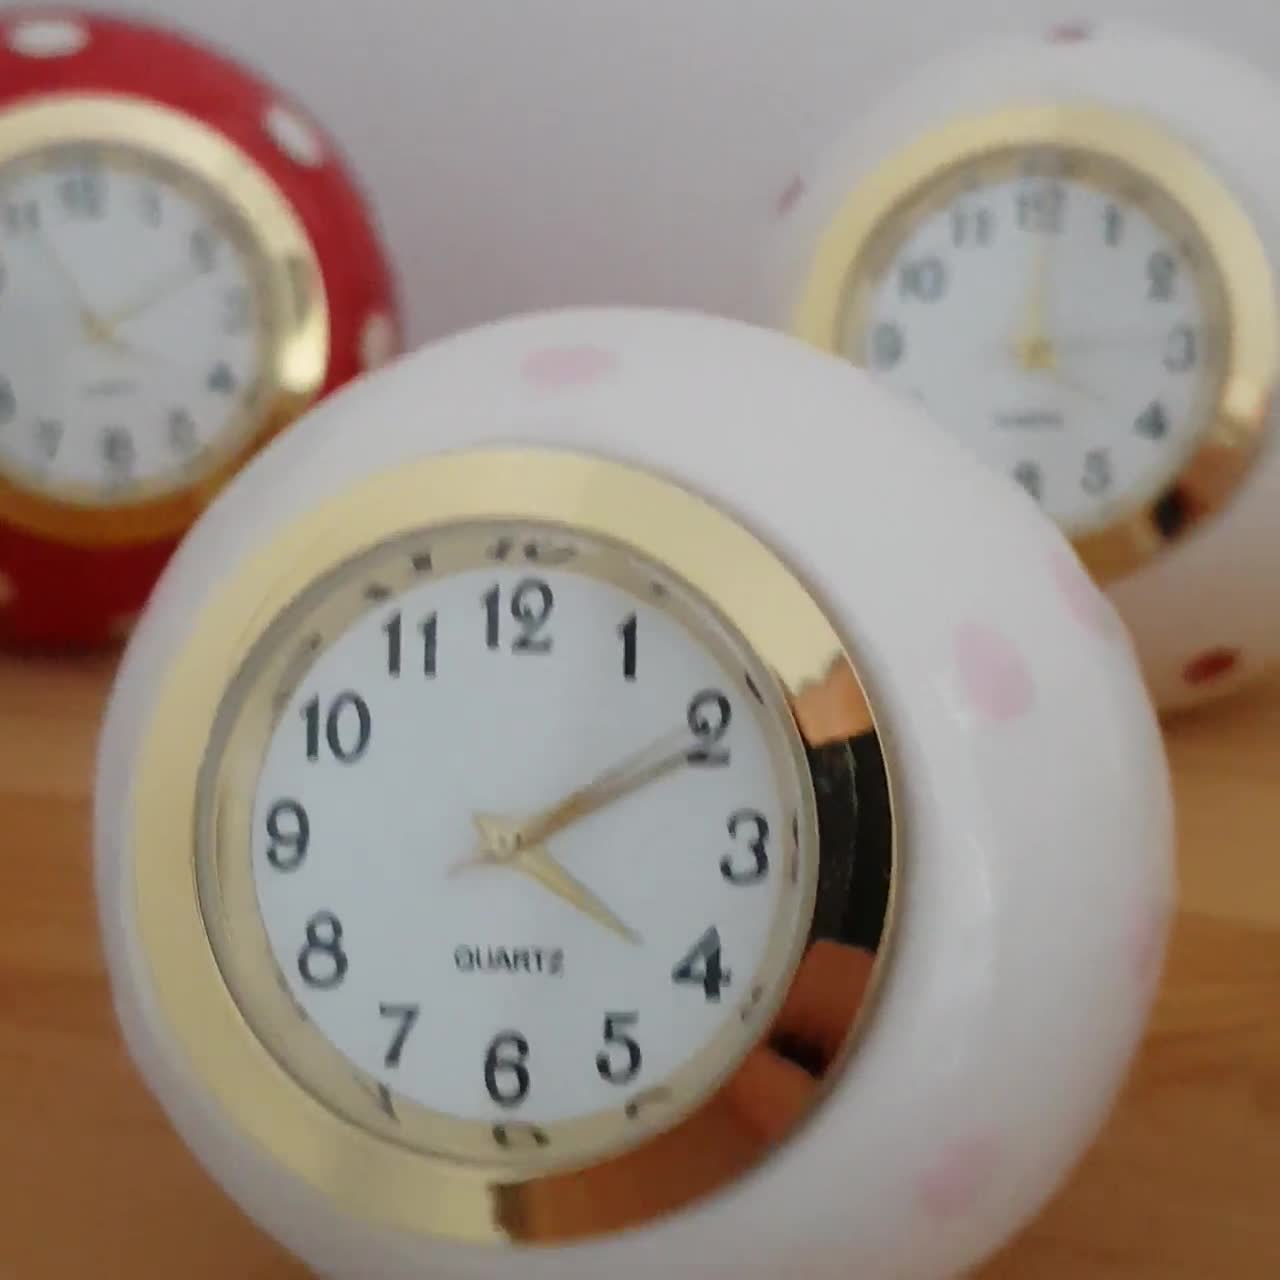 Small Table Clock for Bathroom, White and Red Polka Dot Desk Clock, Made of  Ceramic, Gift Under 50 -  Canada